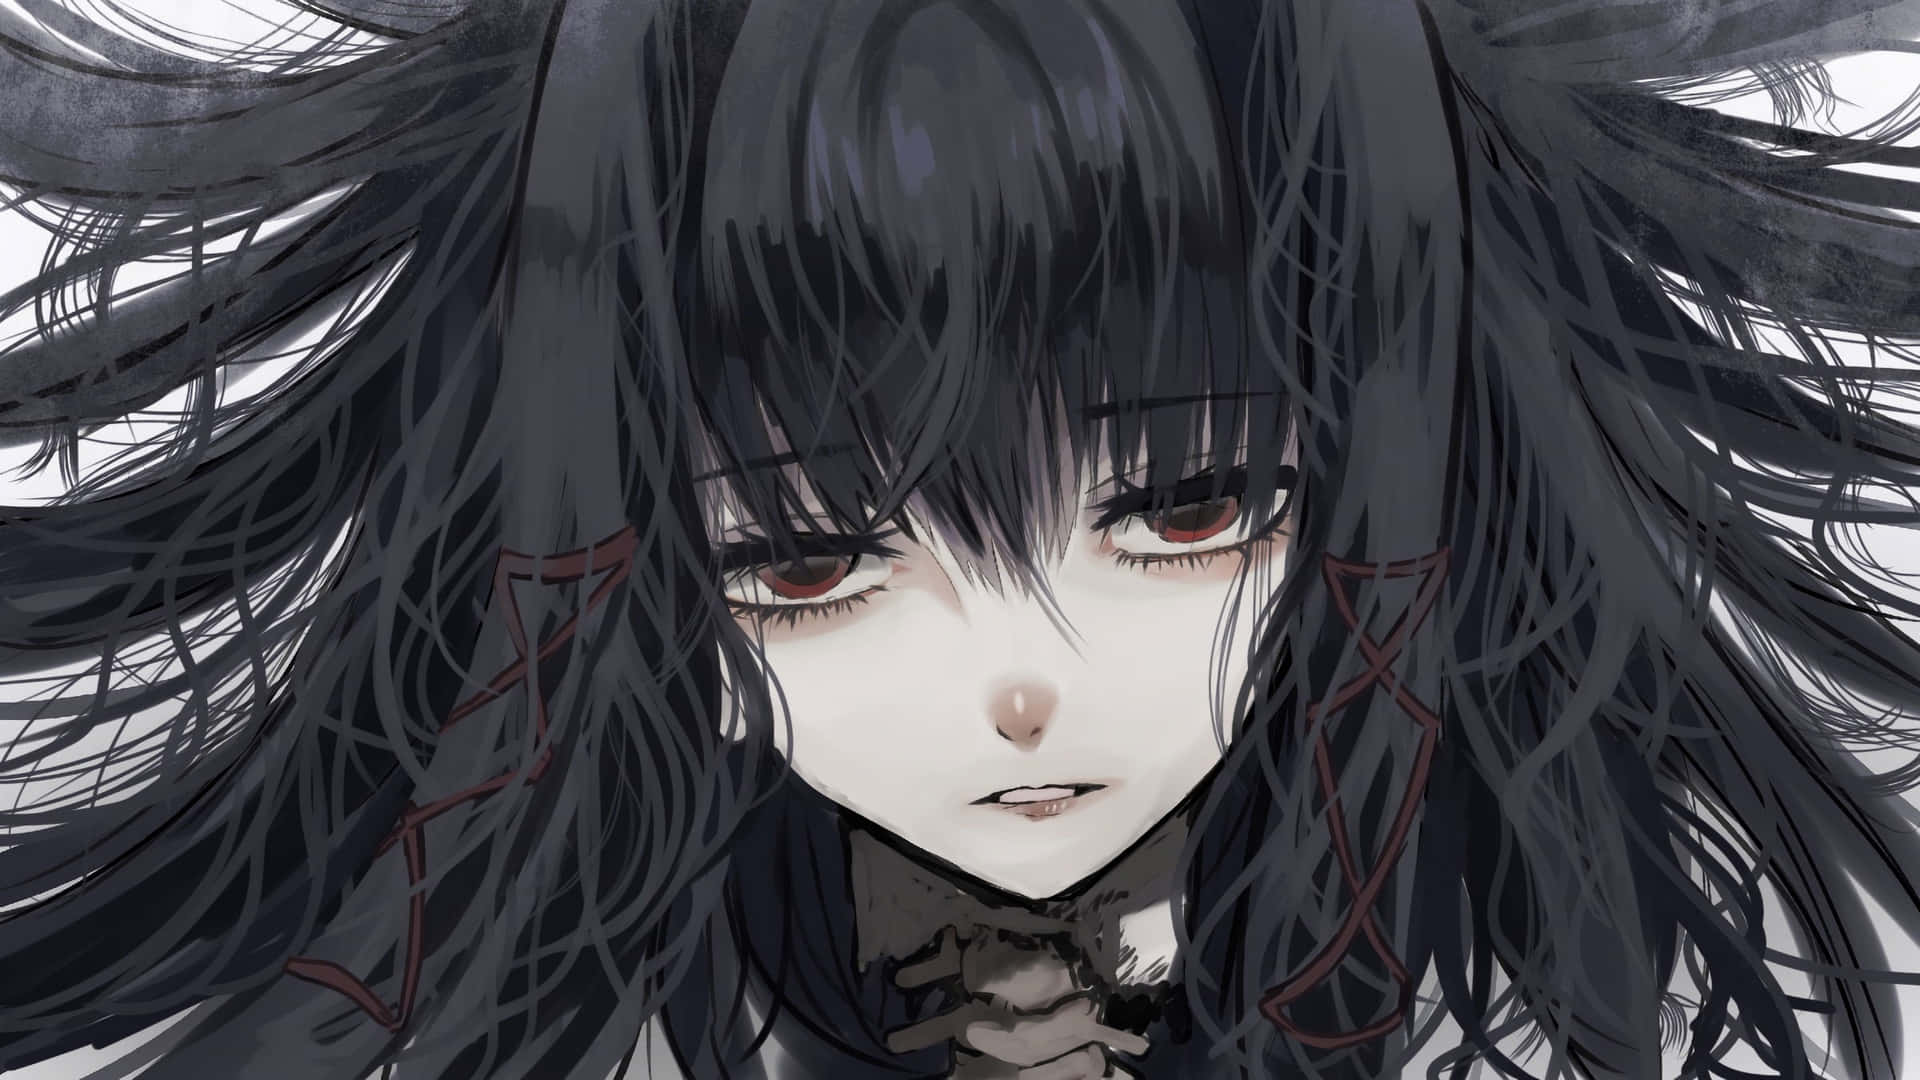 A Black Haired Girl With Red Eyes Wallpaper